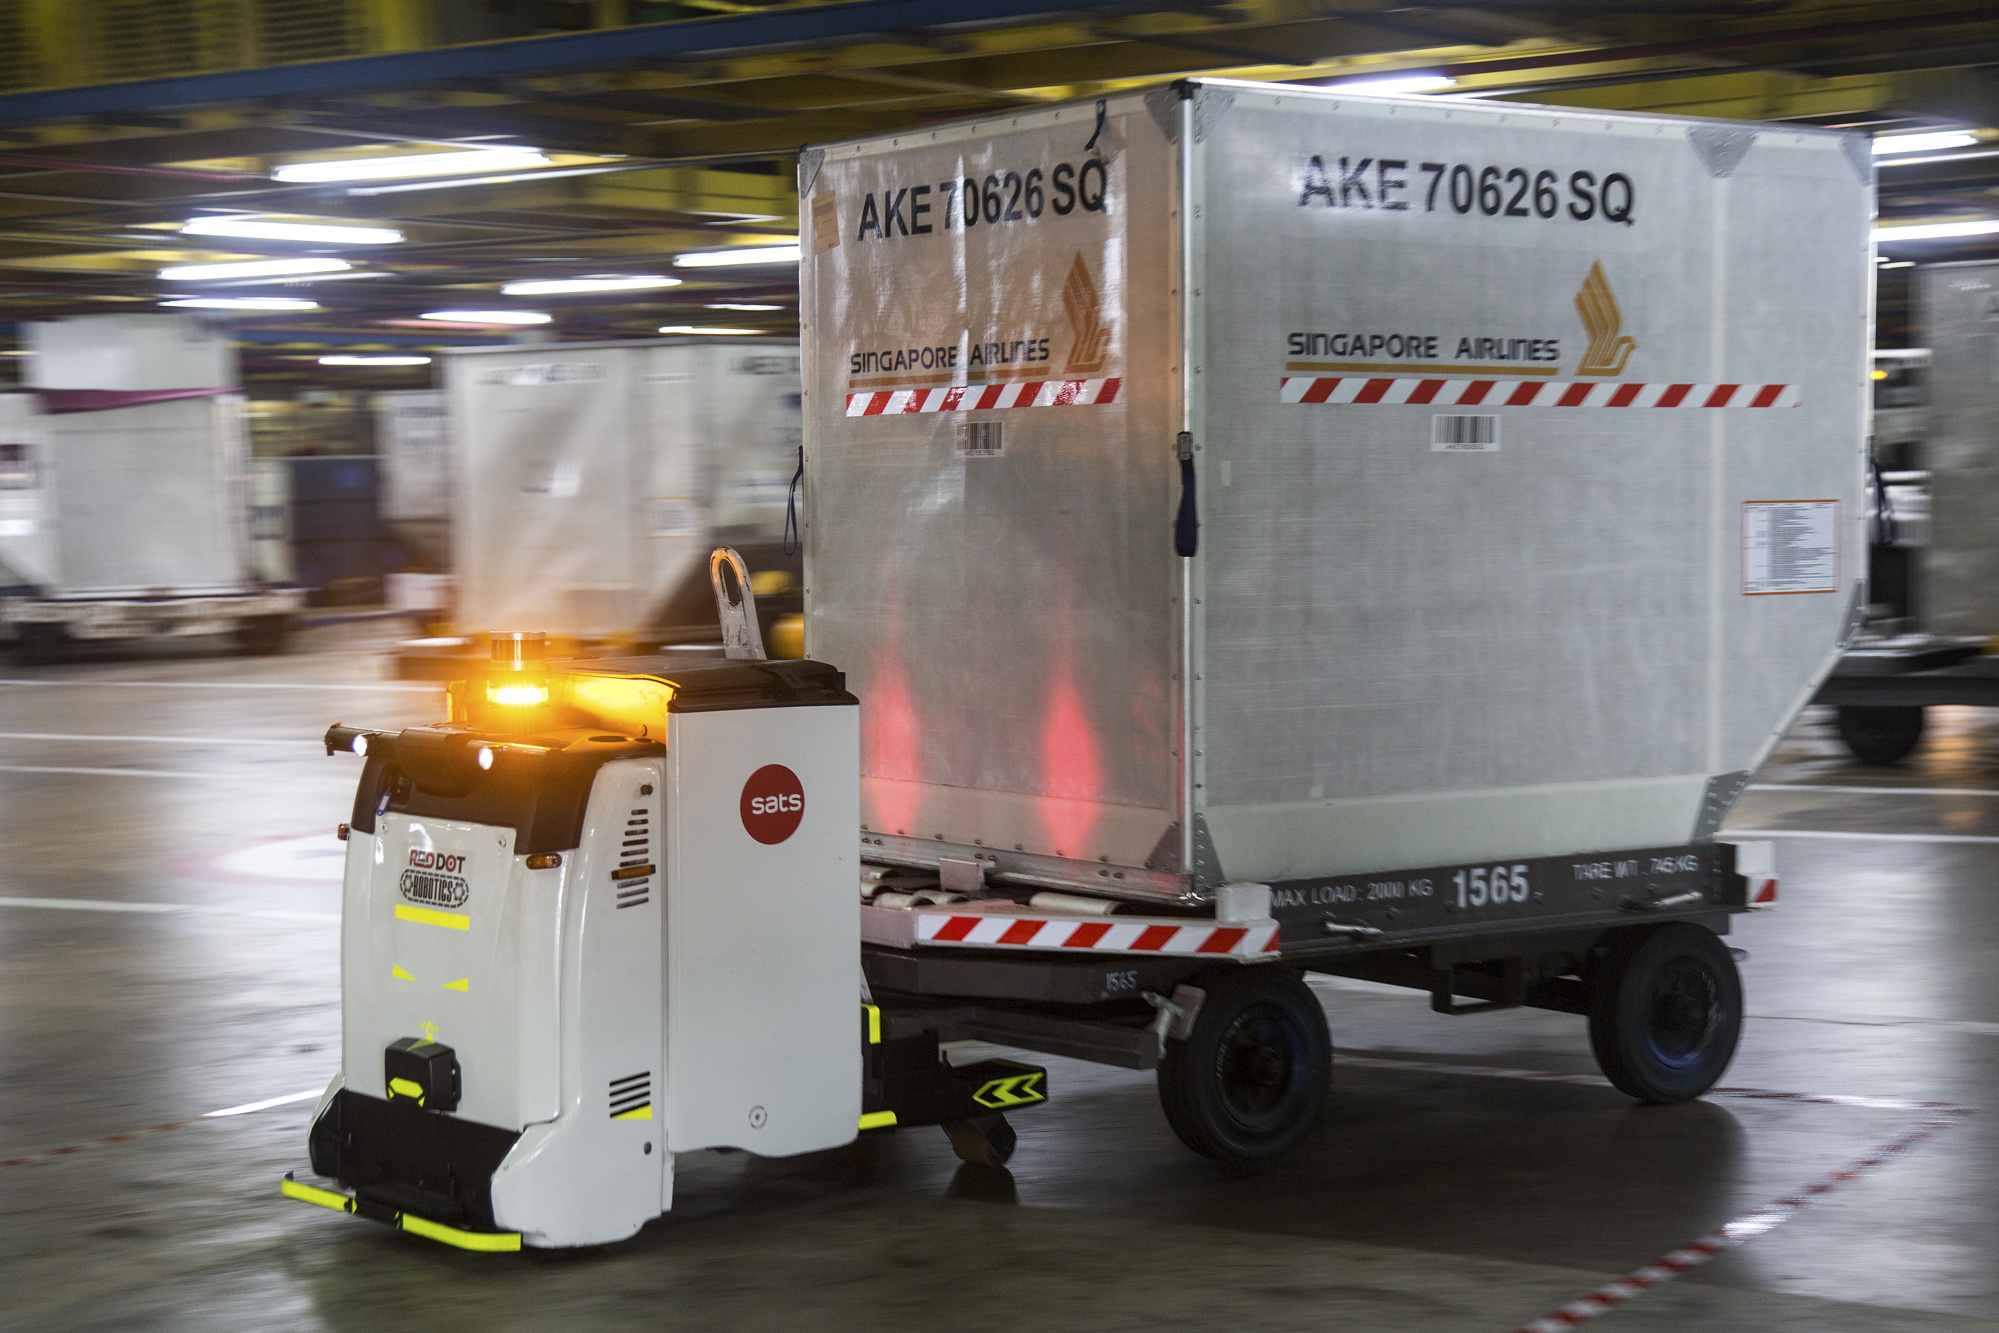 An Autonomous Container Trailer transports a cargo container at Changi International Airport in Singapore.